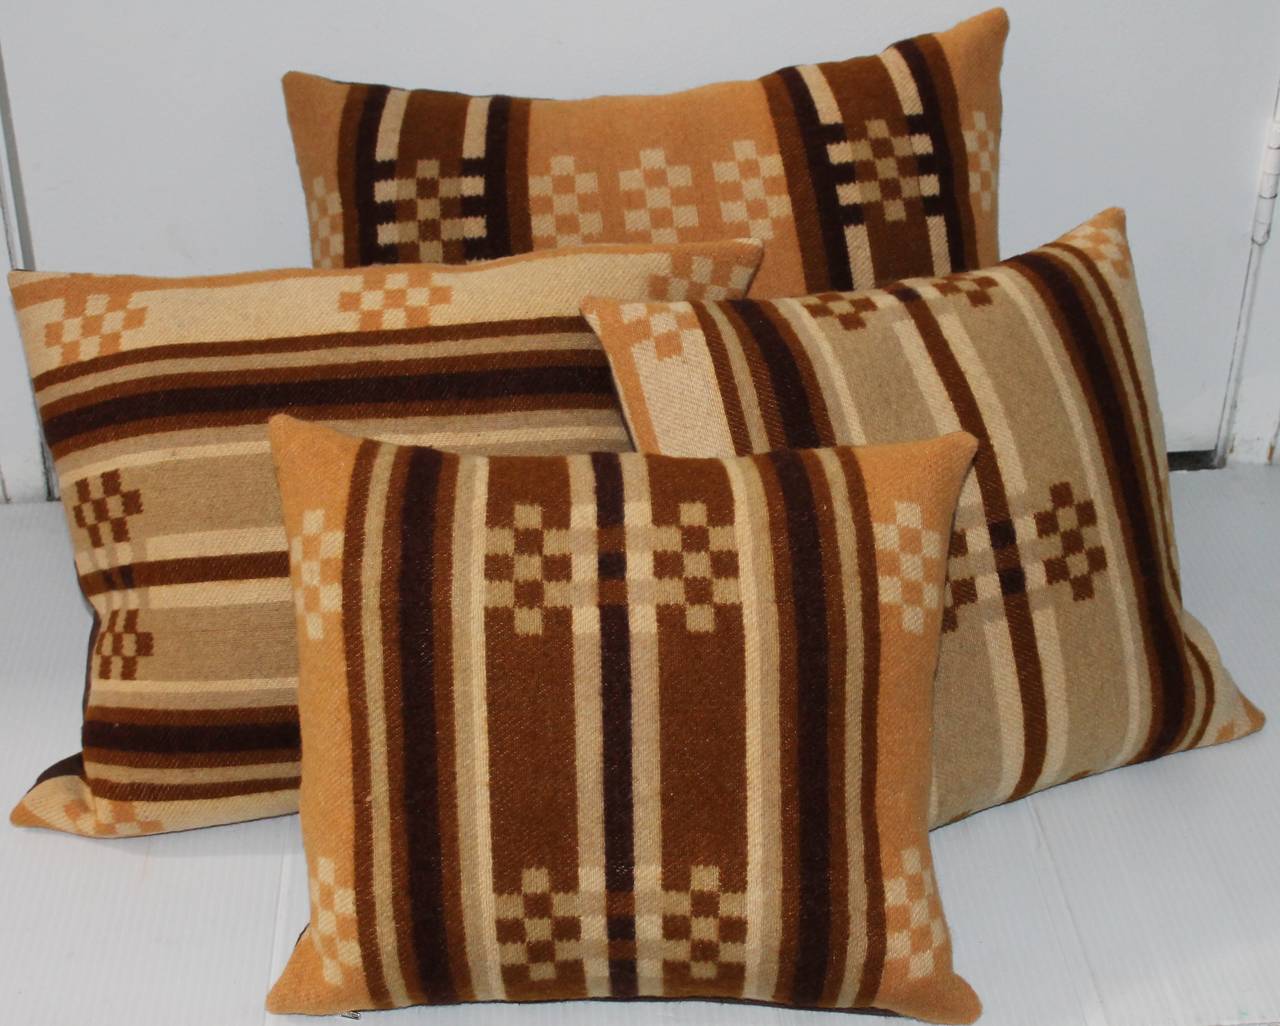 These pillows were made from a 19Thc horse blanket and all have brown cotton linen backings. The inserts are down and feather fill. The sizes are alł slightly different. Sold as one group.